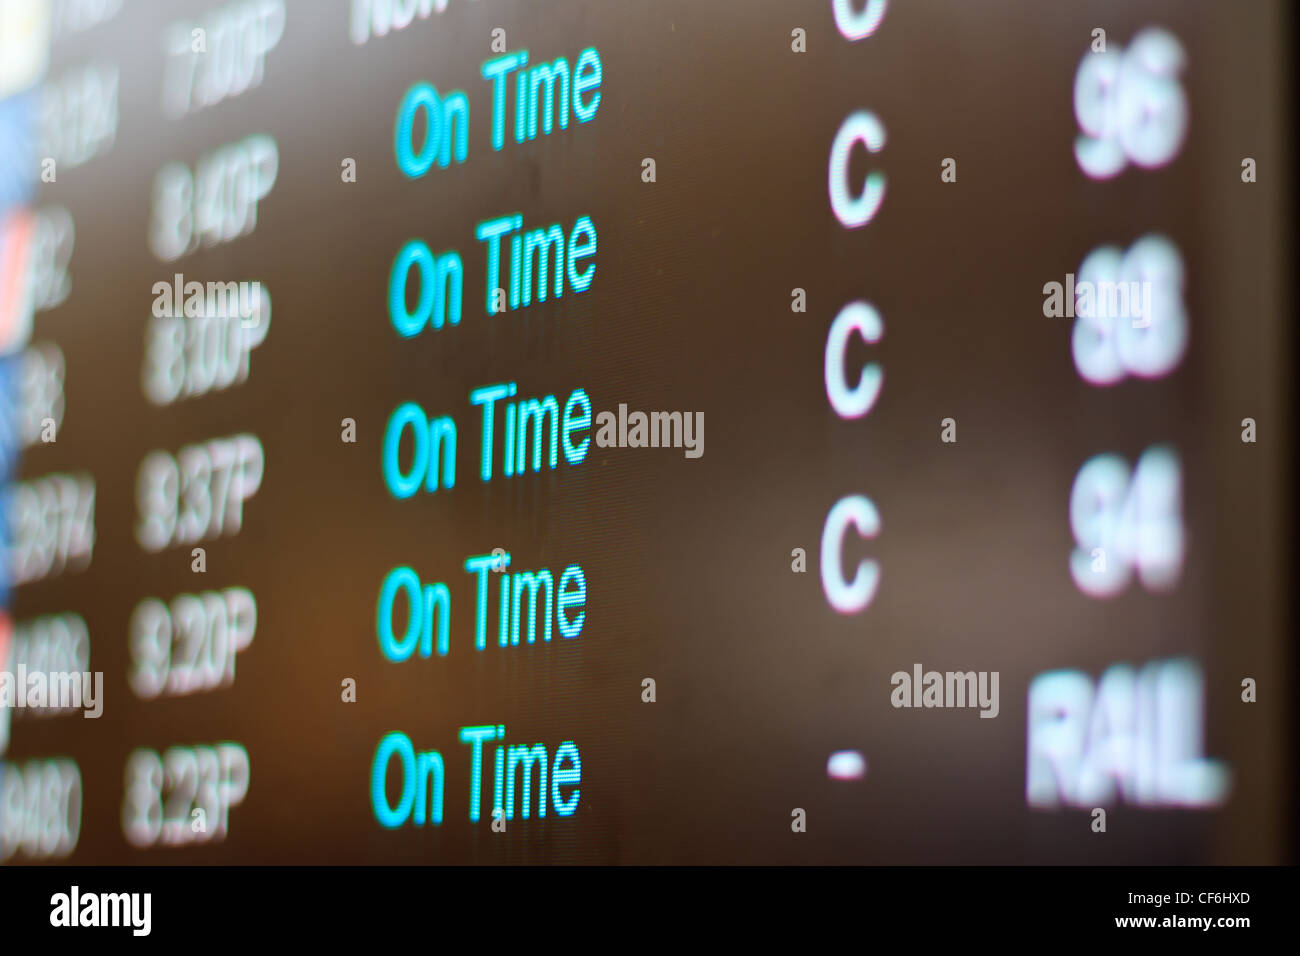 airport terminal monitor, showing flights that are on time or canceled. Stock Photo